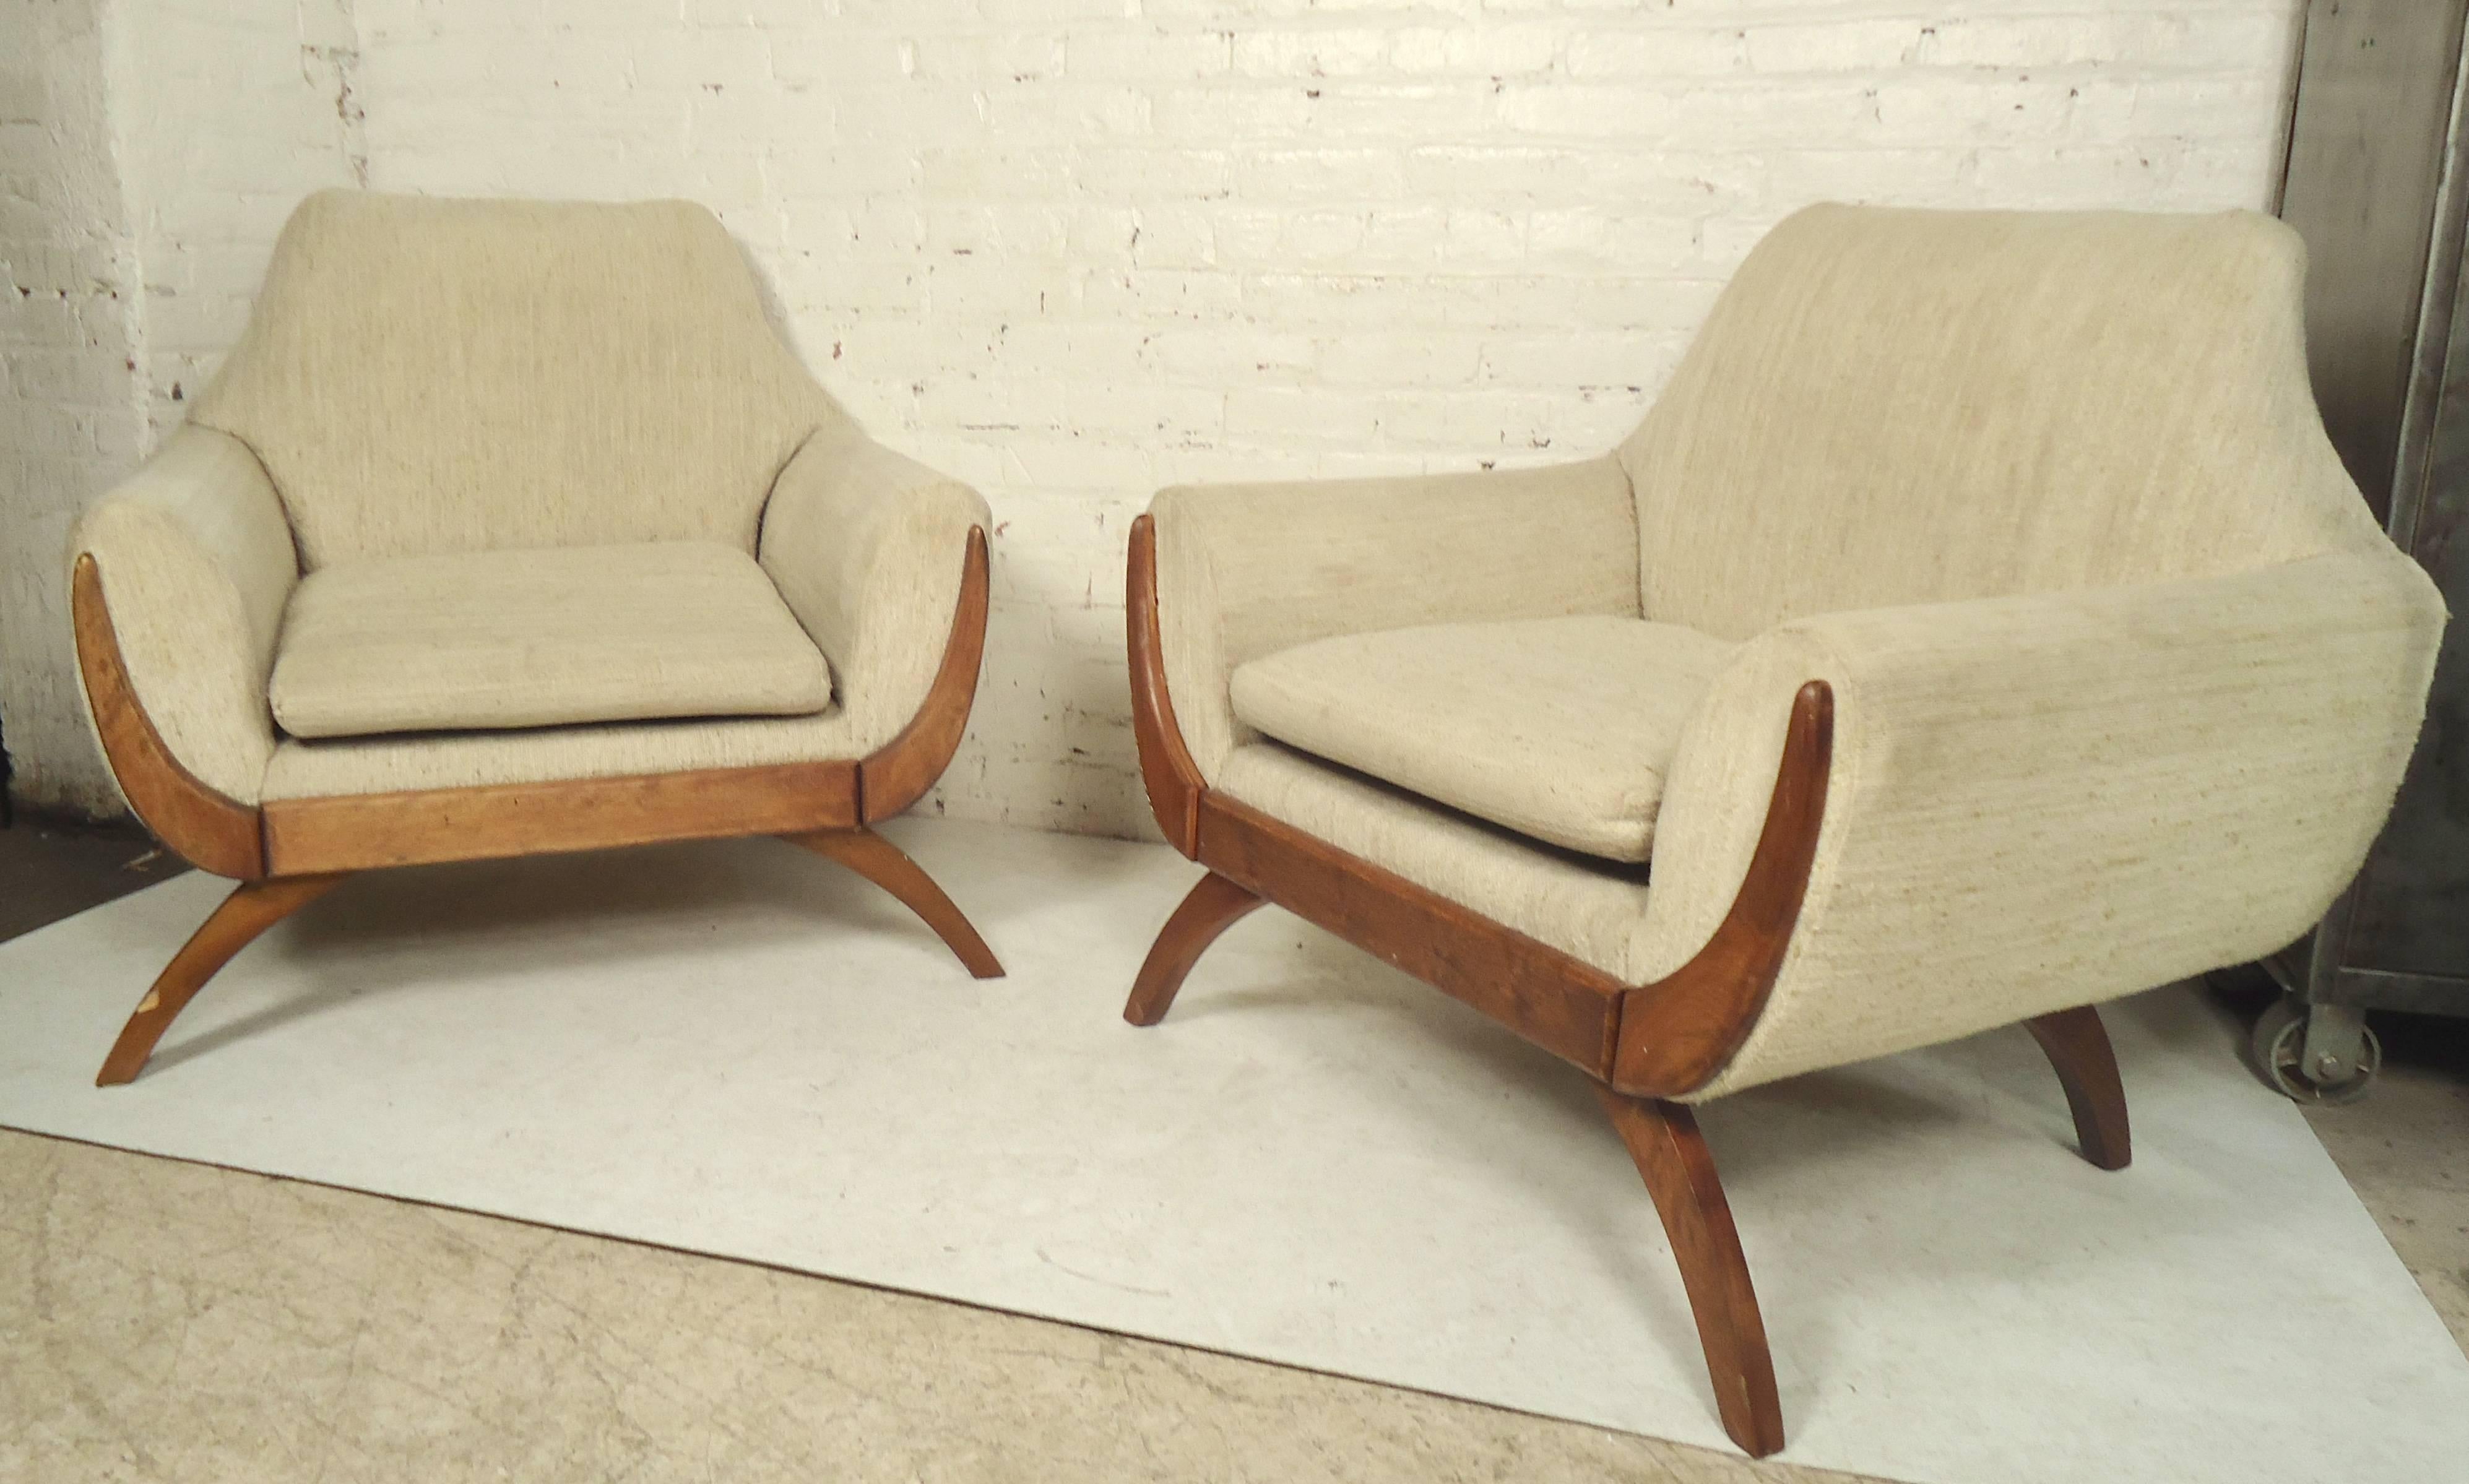 Pair of wide lounge chairs with unique wood trim and sculpted legs.

(Please confirm item location - NY or NJ - with dealer).
 